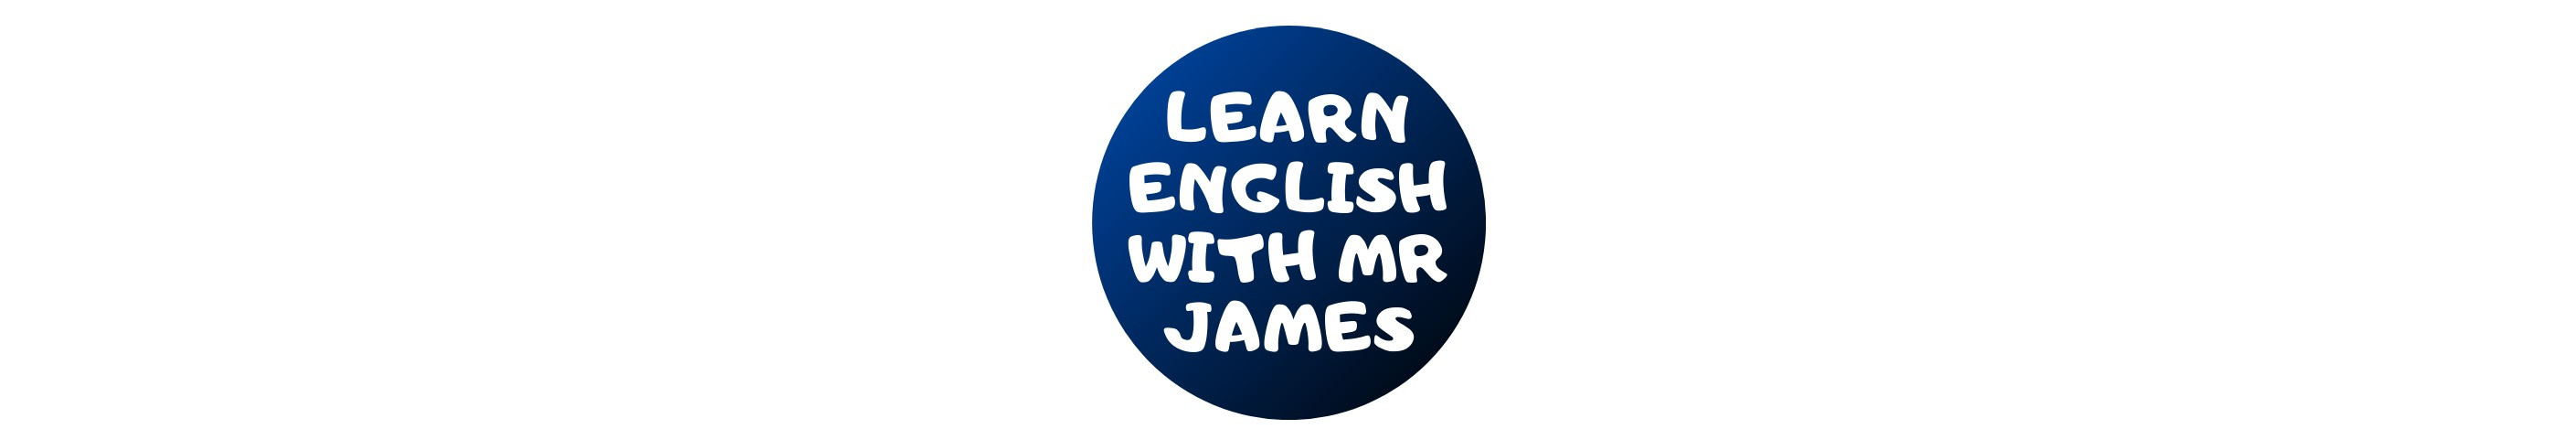 Learn English with Mr James